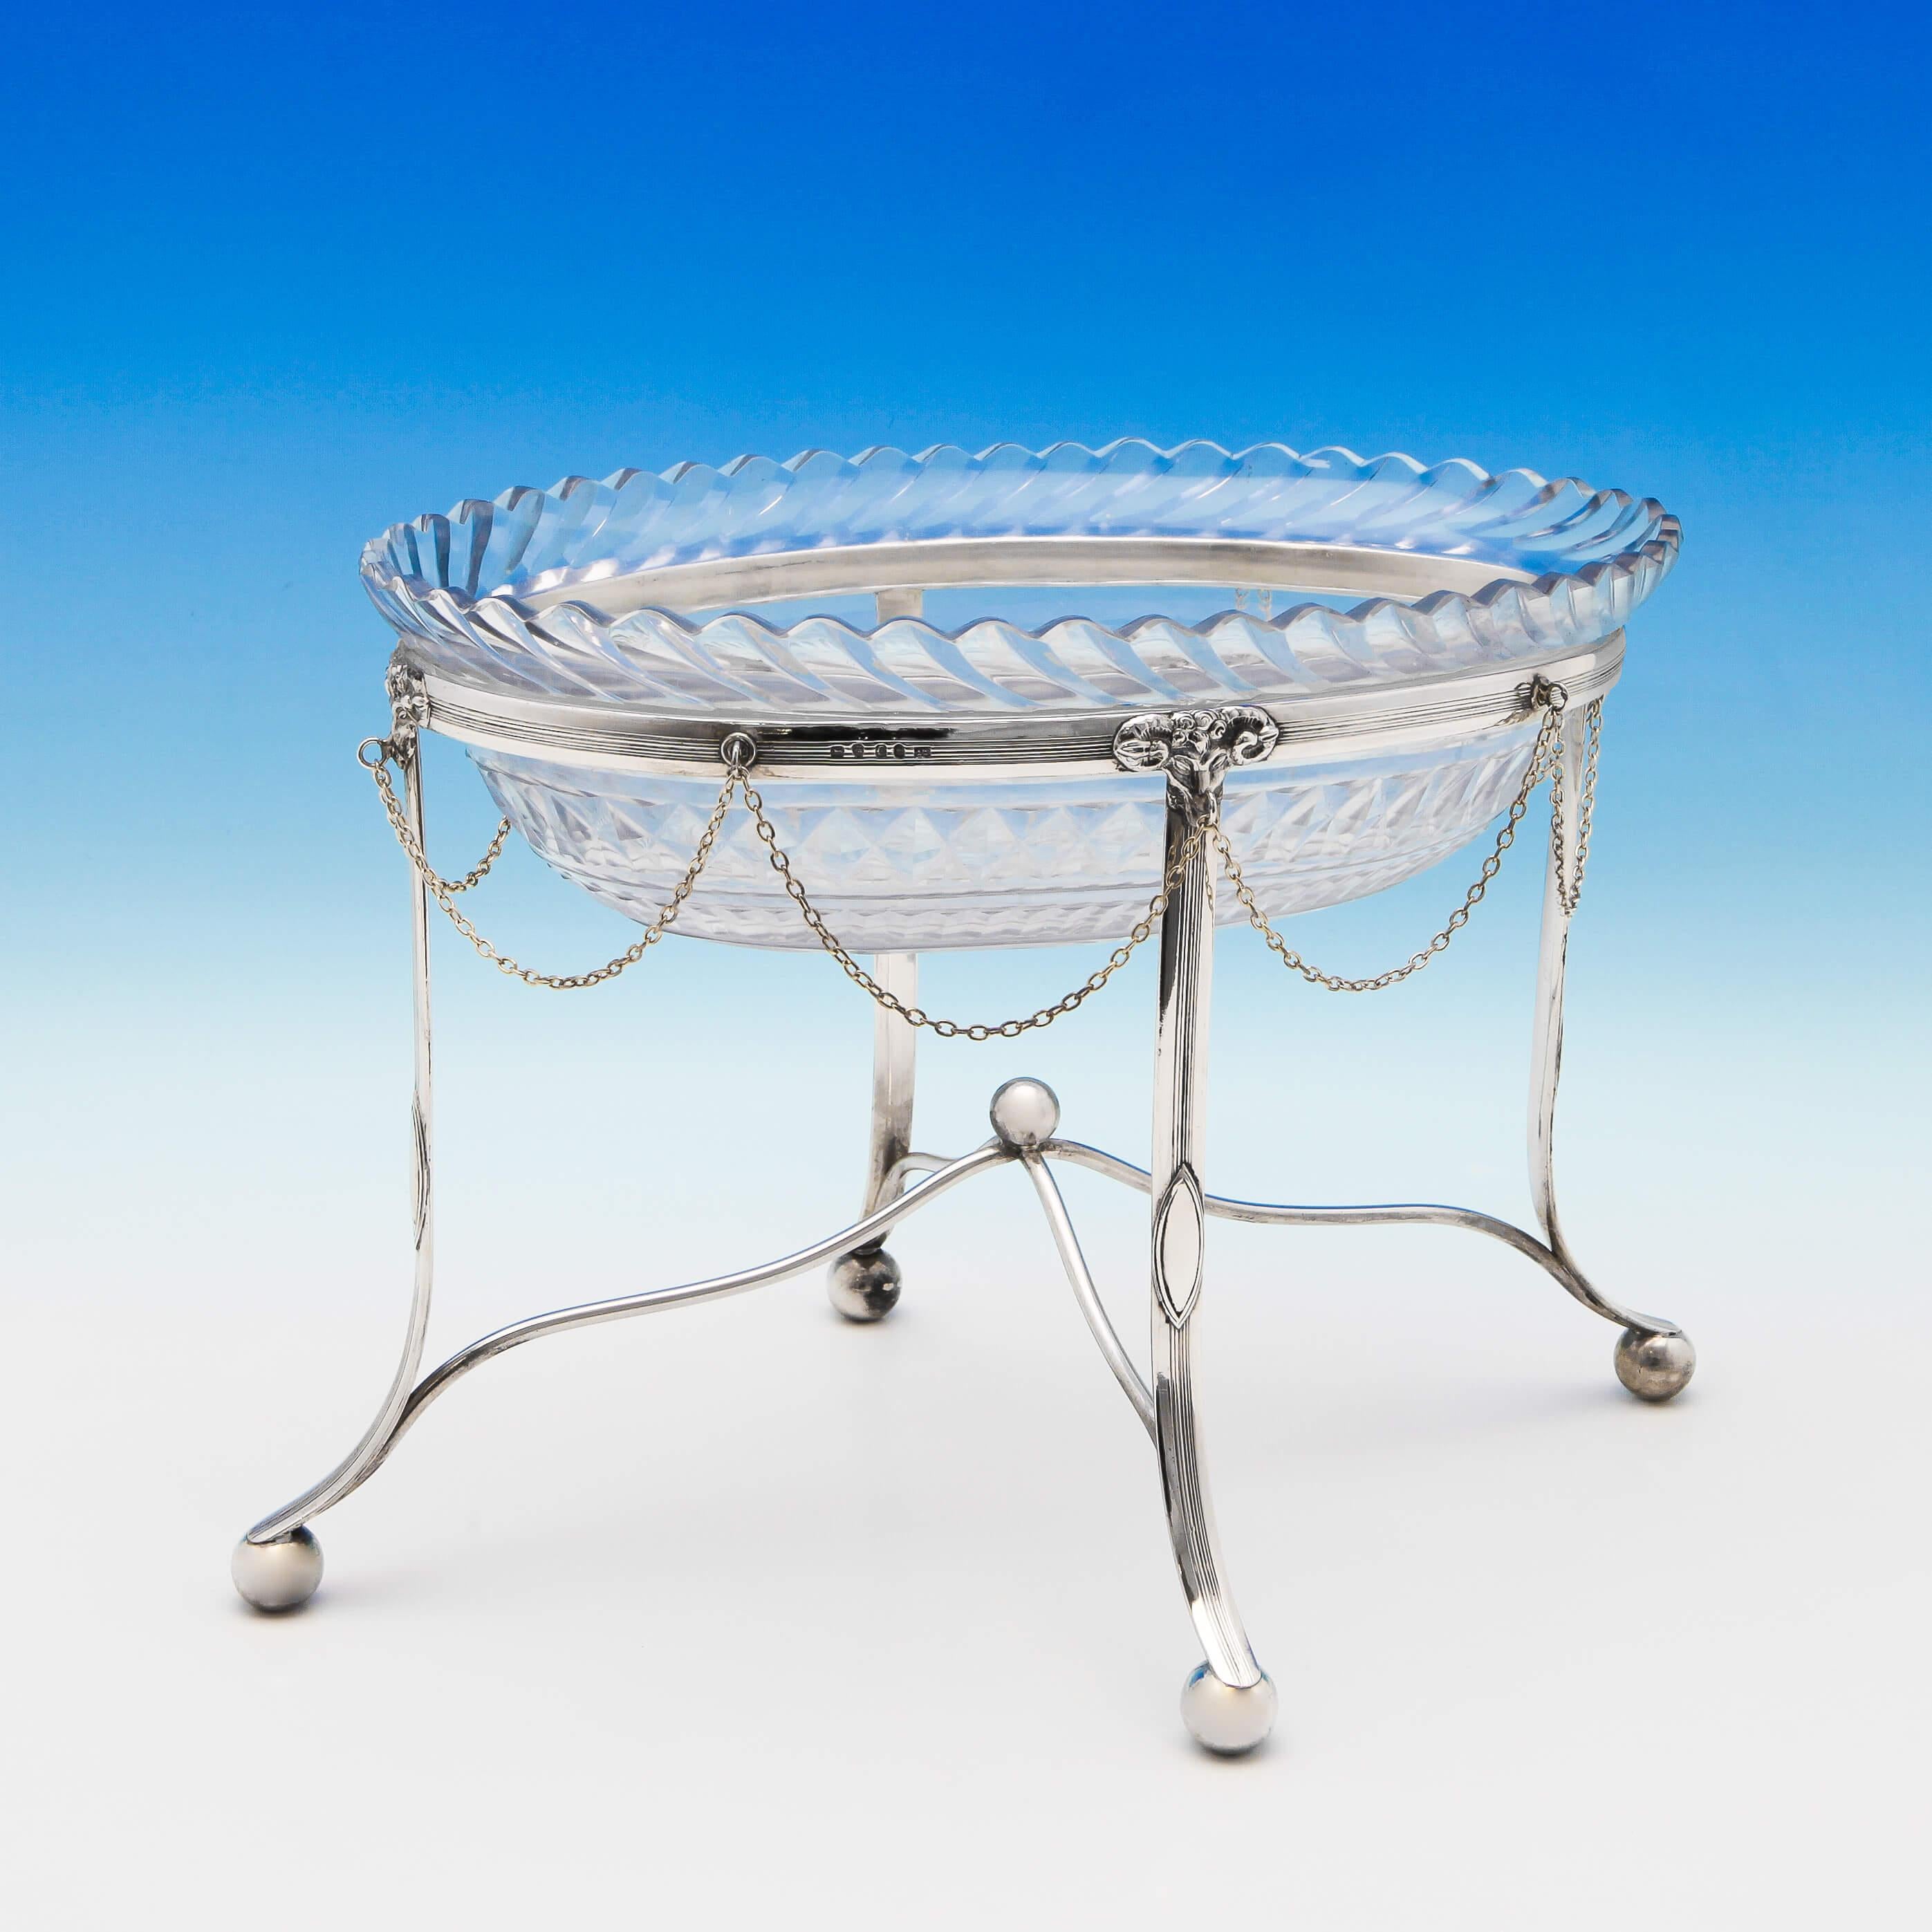 Hallmarked in London in 1798 by John Touliet, this handsome, antique, sterling silver centrepiece, features an oval glass dish supported by a neoclassical silver stand, with Adams style detailing. The centrepiece measures 9 inches (23cm) tall, by